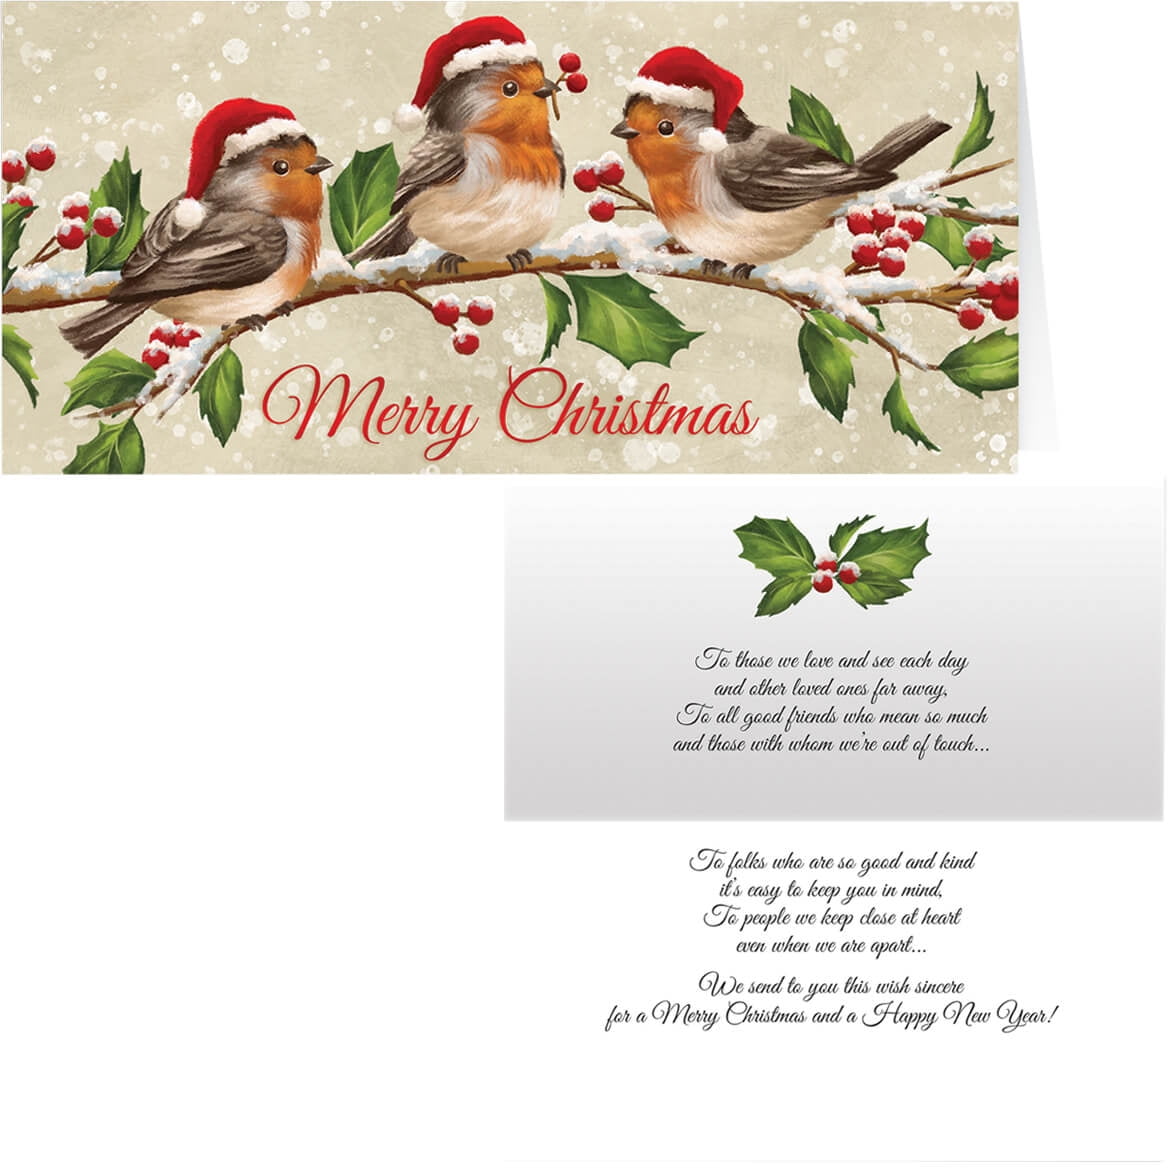 Details about   Prayer Card Gift Christmas Card Set of 20  